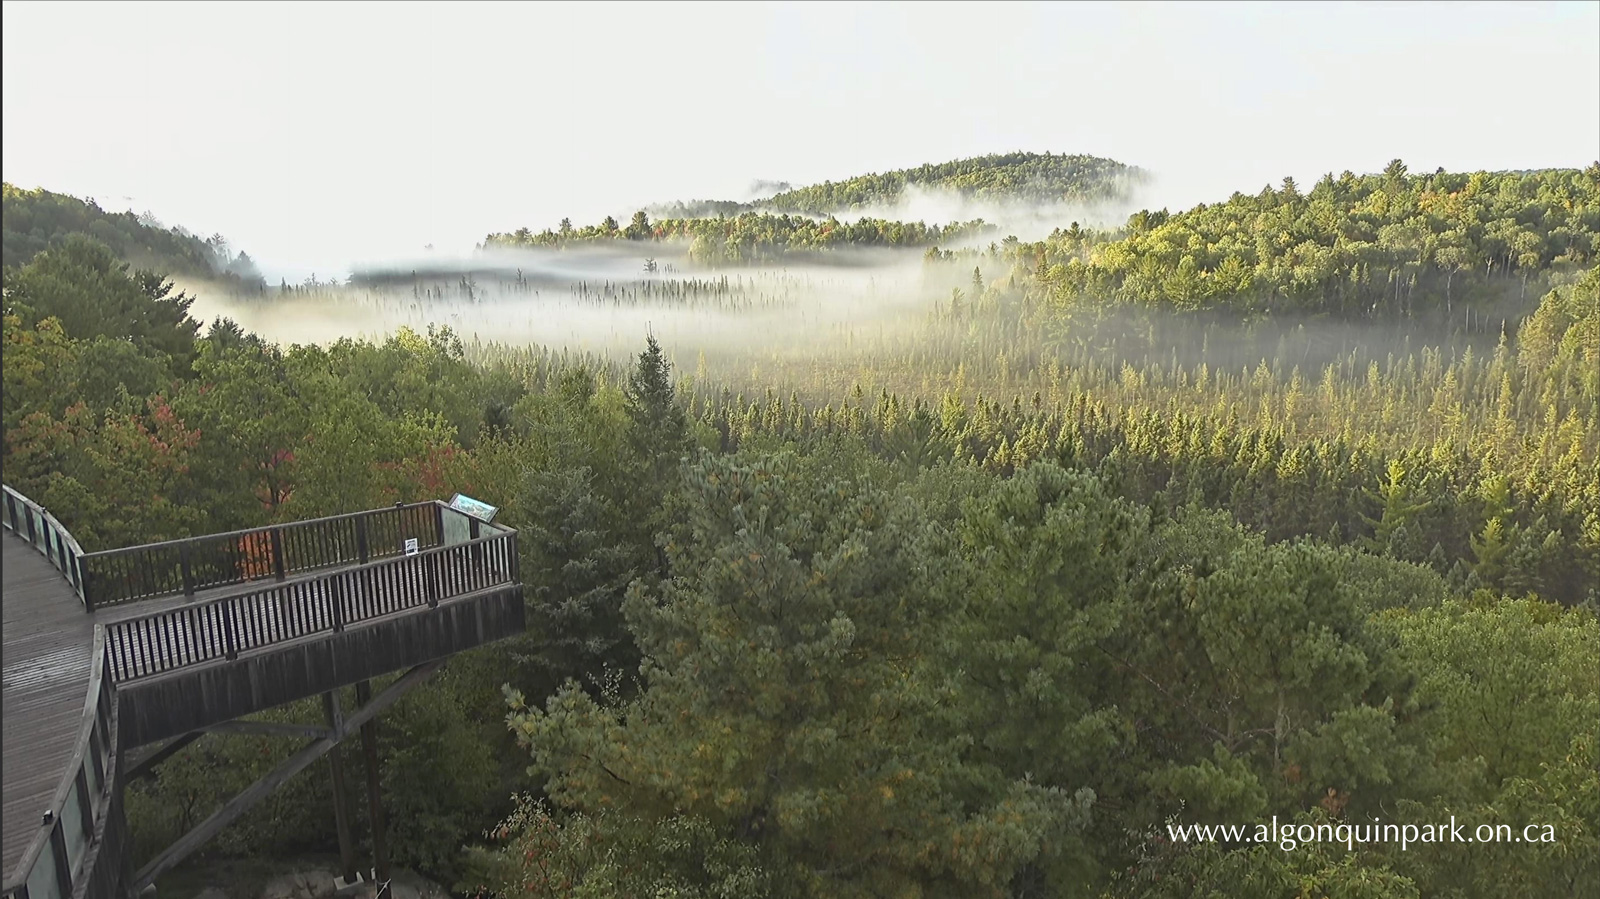 View of the Sunday Creek valley in Algonquin Park on September 15, 2022, when temperatures dipped to -1°C overnight at the Park's East Gate.